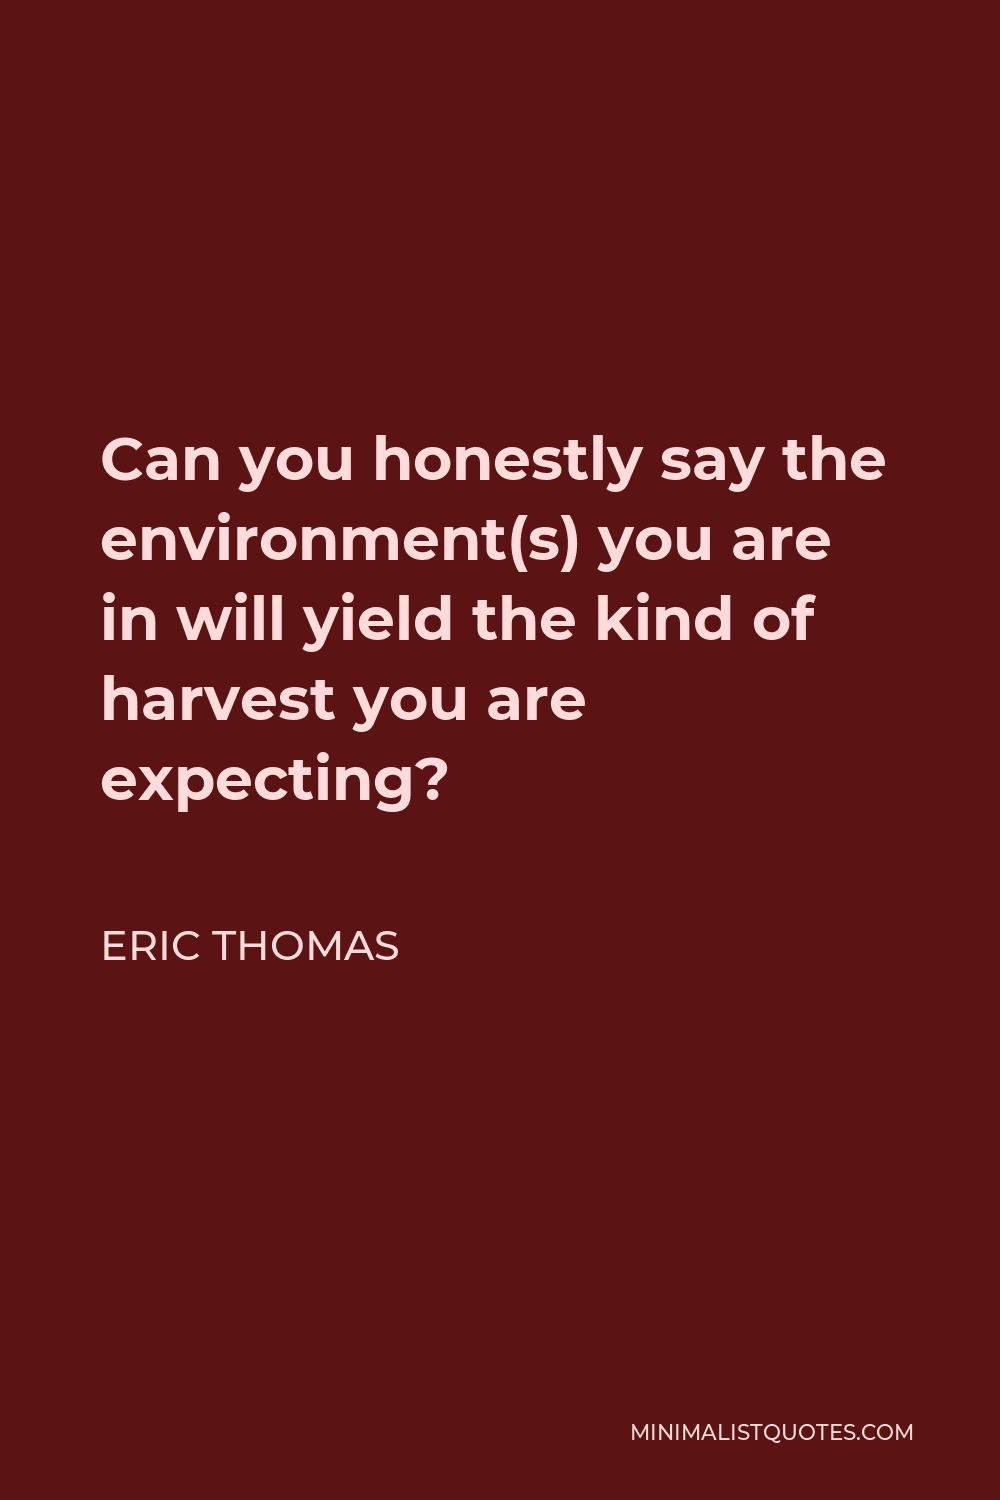 Eric Thomas Quote - Can you honestly say the environment(s) you are in will yield the kind of harvest you are expecting?